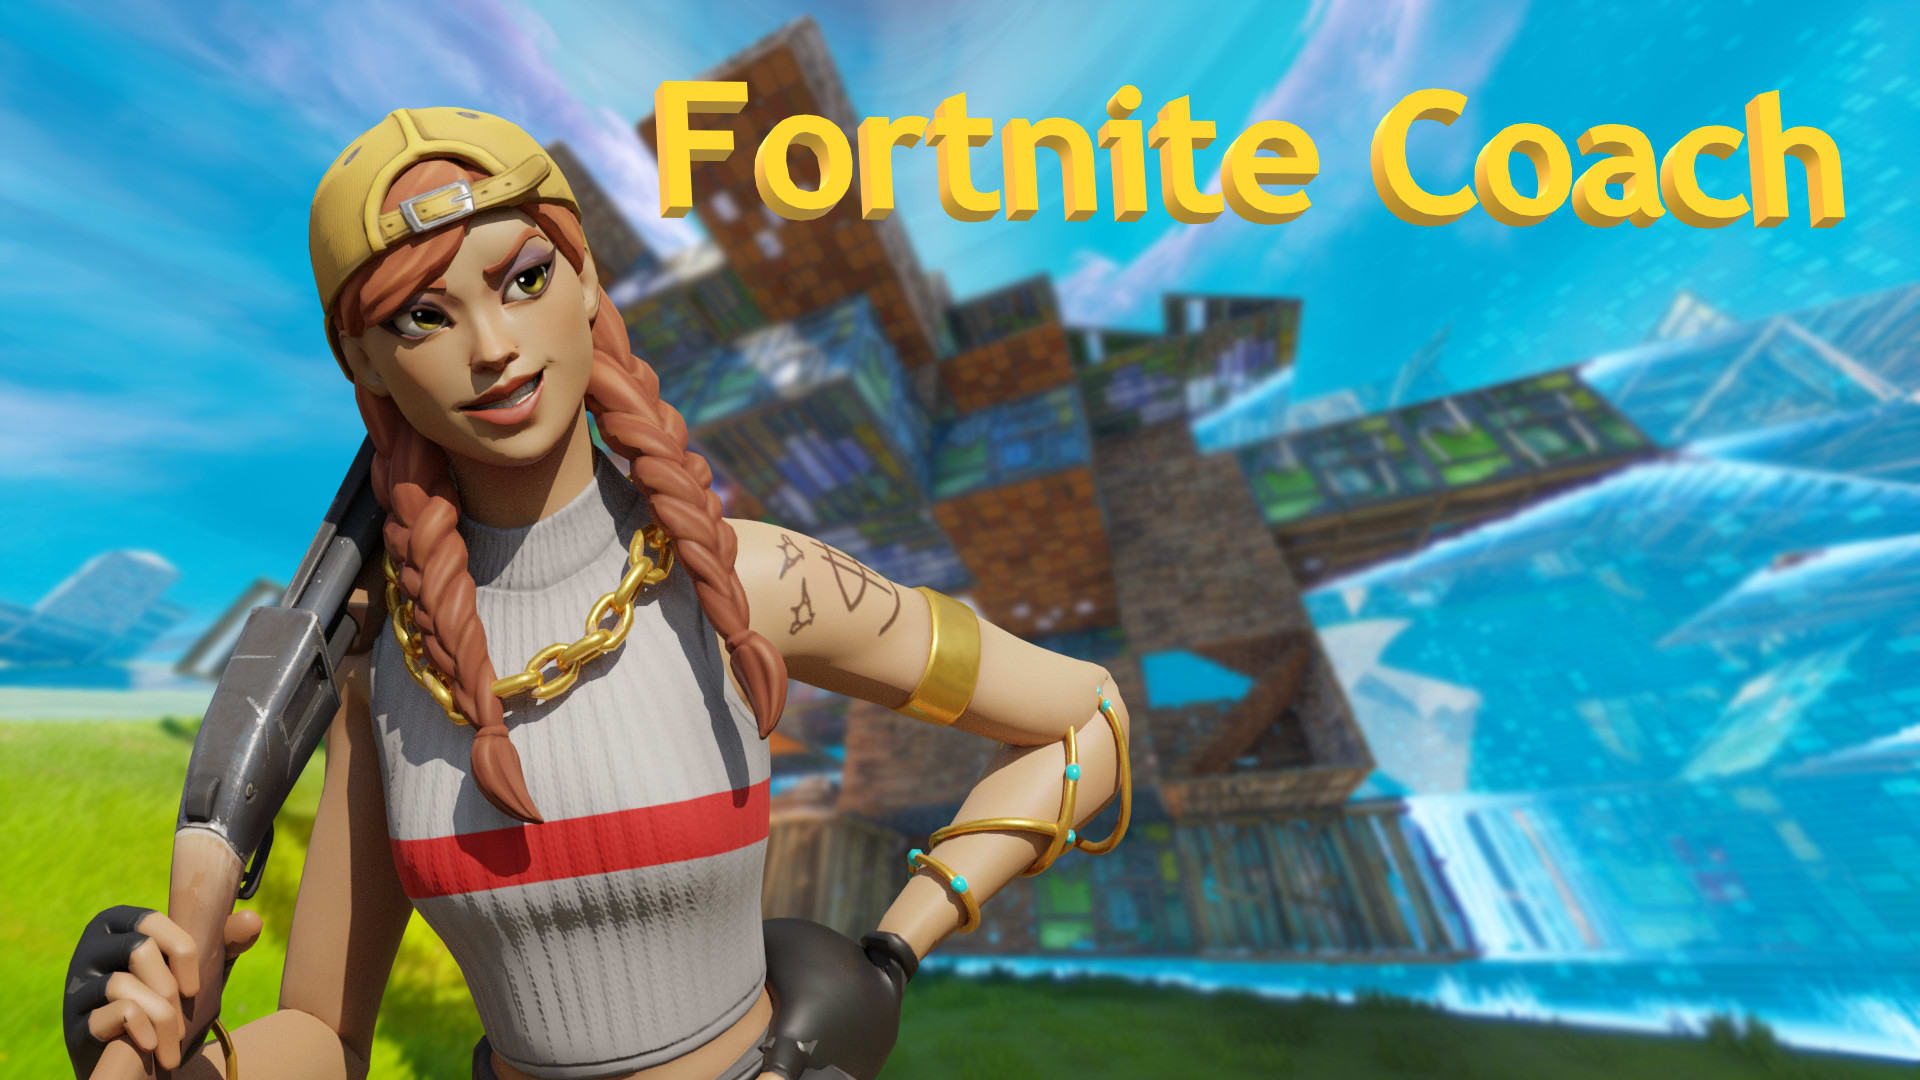 Video Game Coach Fortnite Be Your Personal Fortnite Coach For One Hour By Arc Eclipse Fiverr